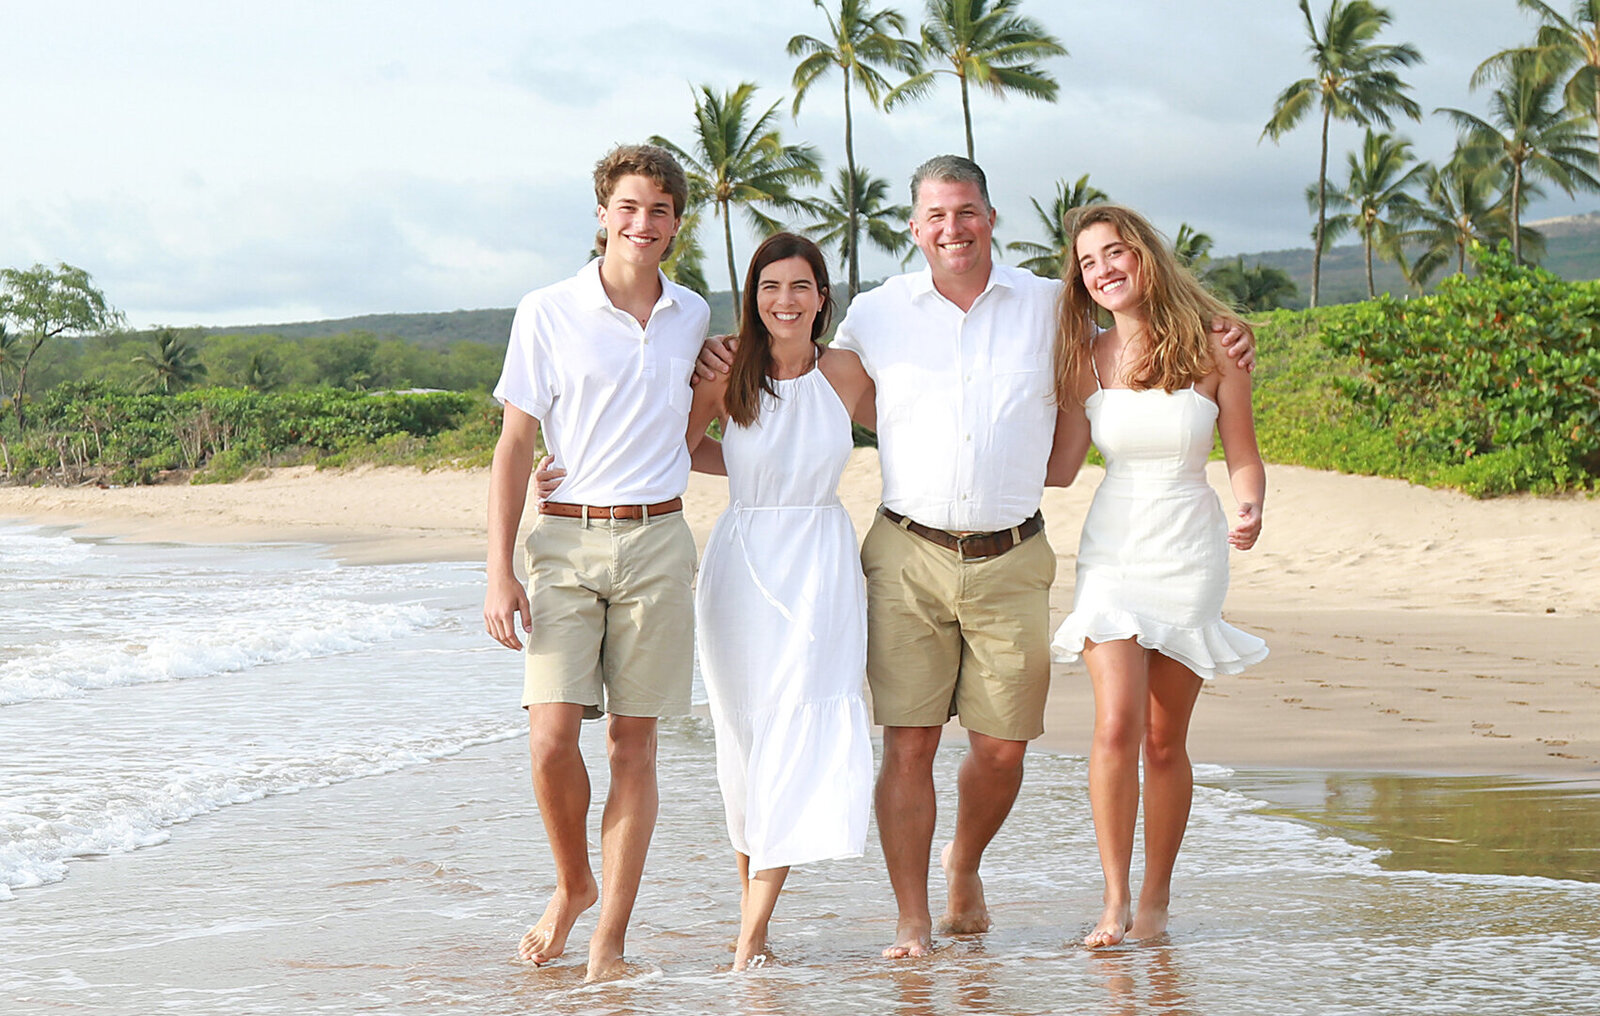 Photographers on Maui, for family portrait photography at affordable prices.